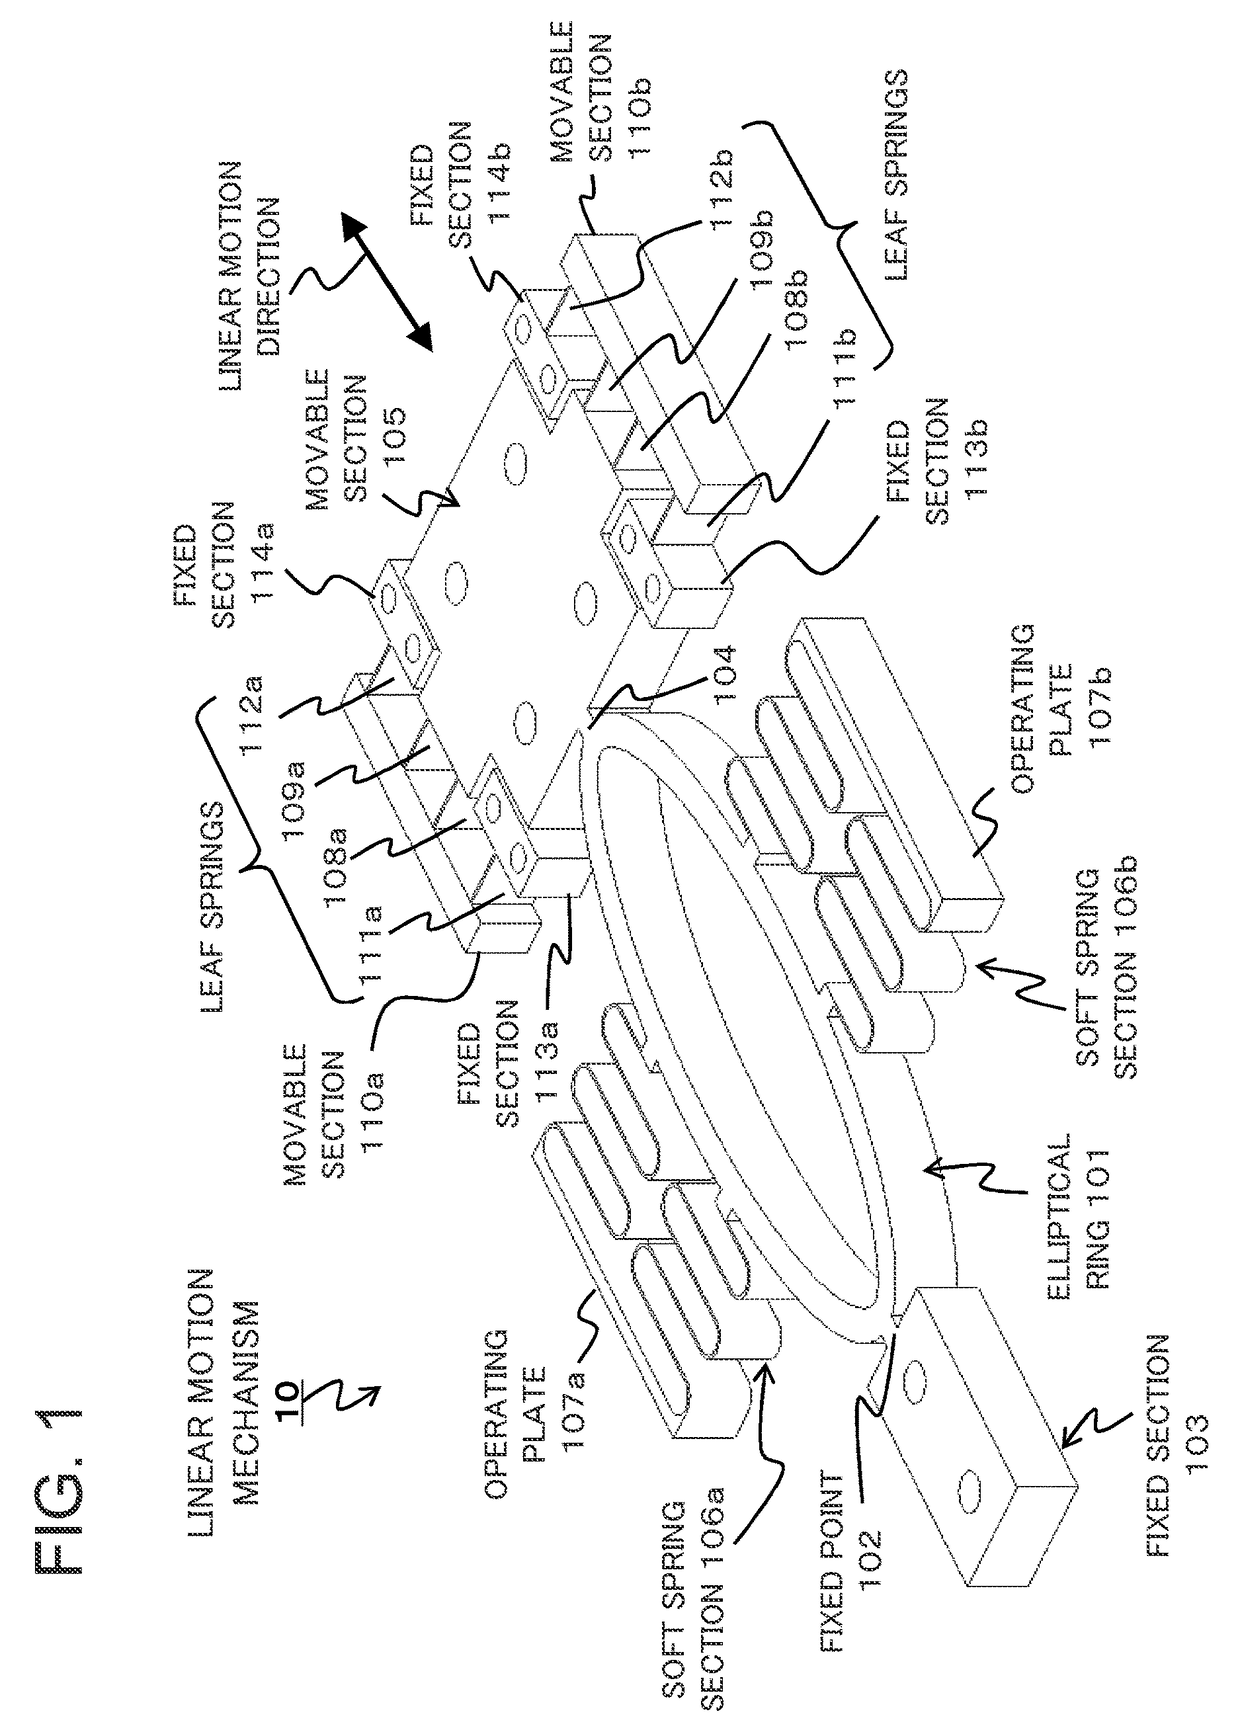 Linkage rod including limited-displacement flexible mechanism